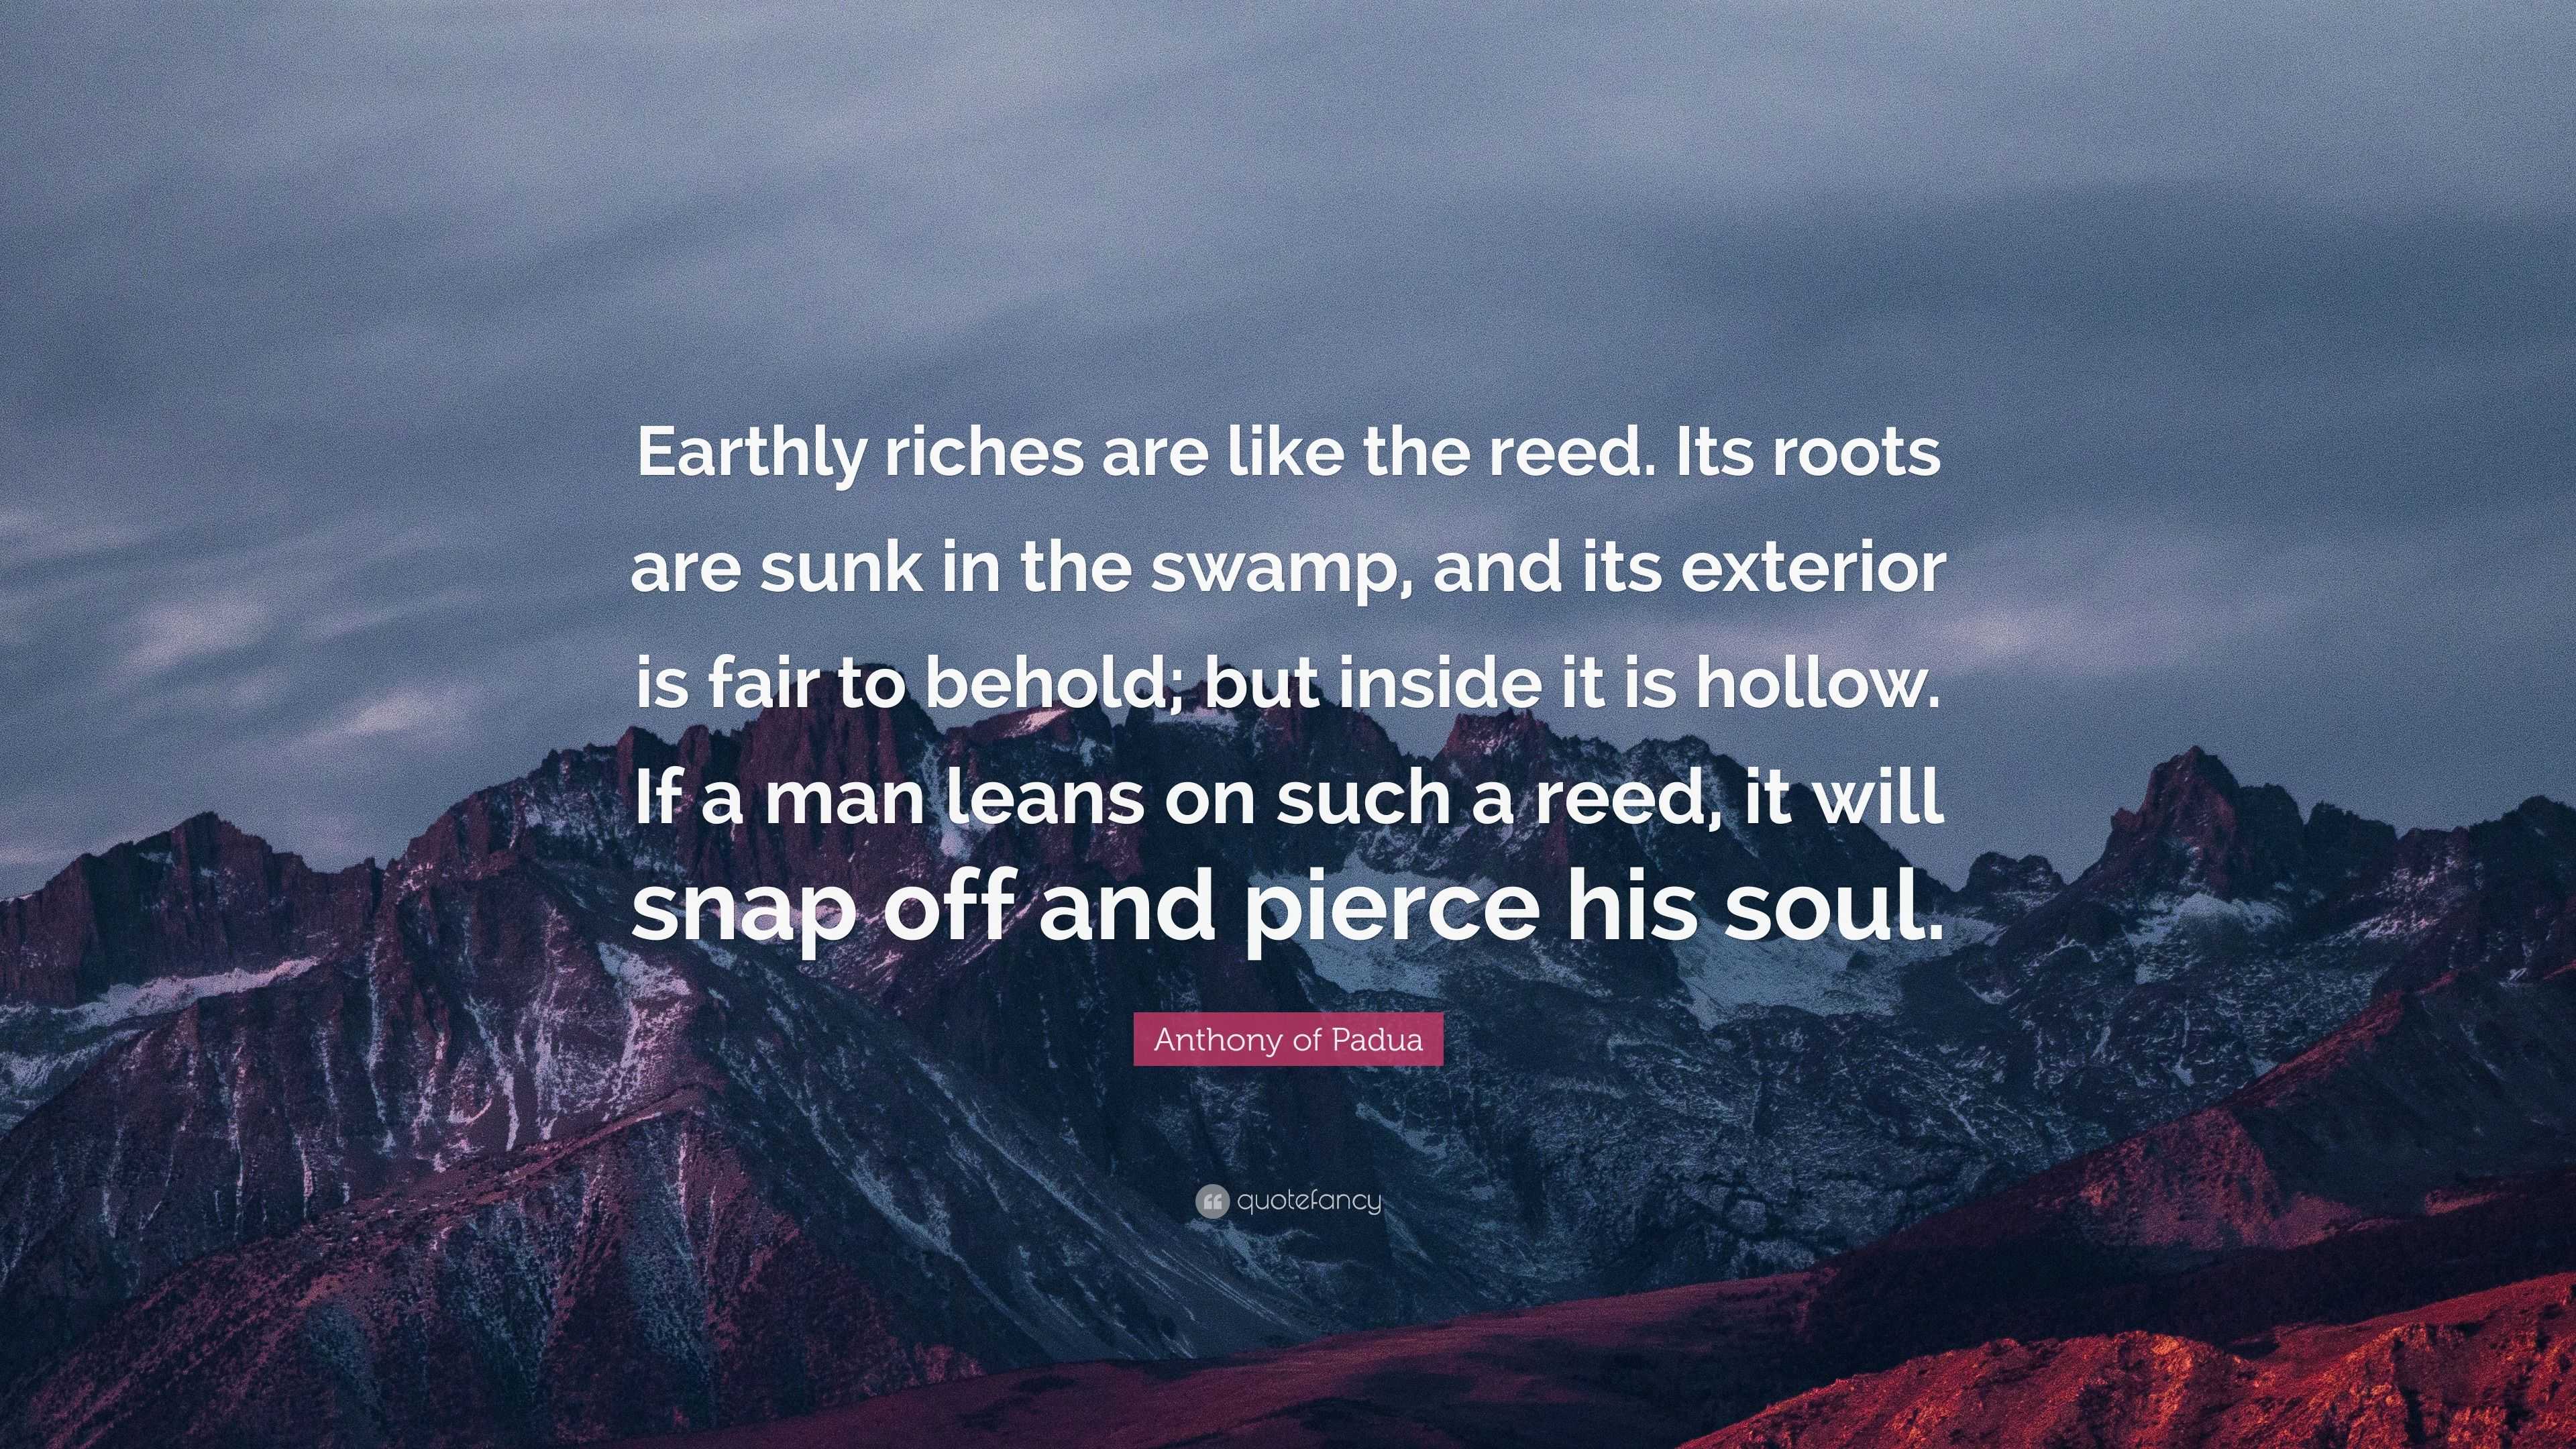 Anthony of Padua Quote: “Earthly riches are like the reed. Its roots ...